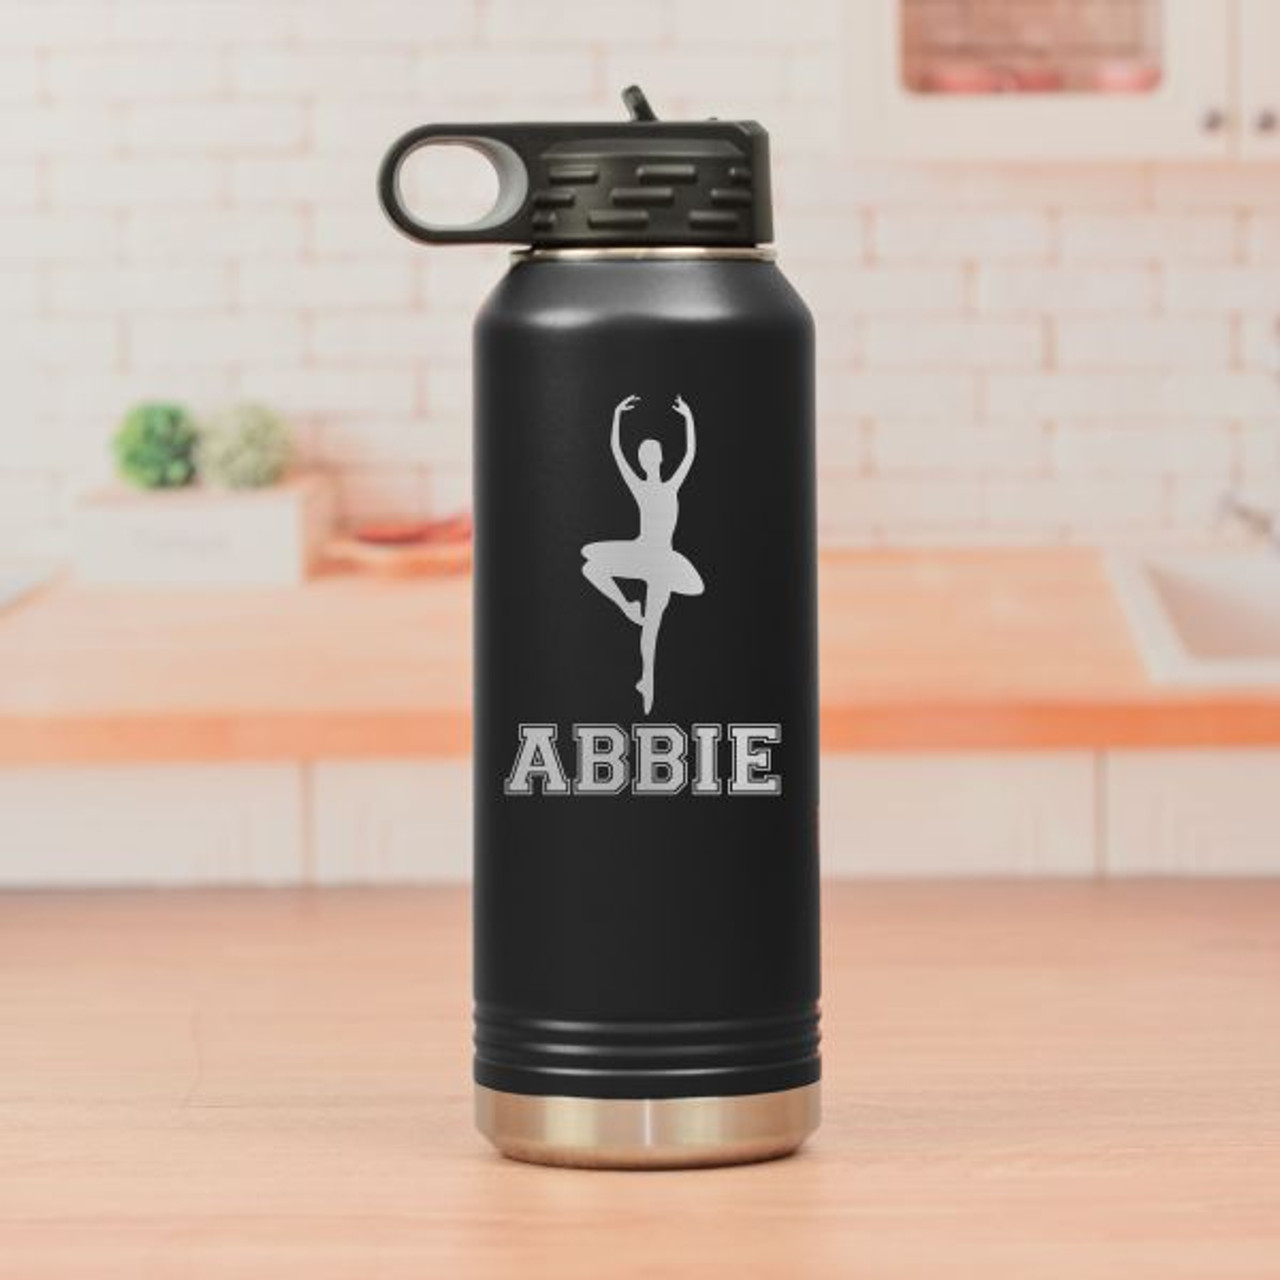 https://cdn11.bigcommerce.com/s-mdwz5t7wme/images/stencil/1280x1280/products/2191/6835/DW5072-Dance-waterbottle-K__70757.1614192085.jpg?c=2?imbypass=on